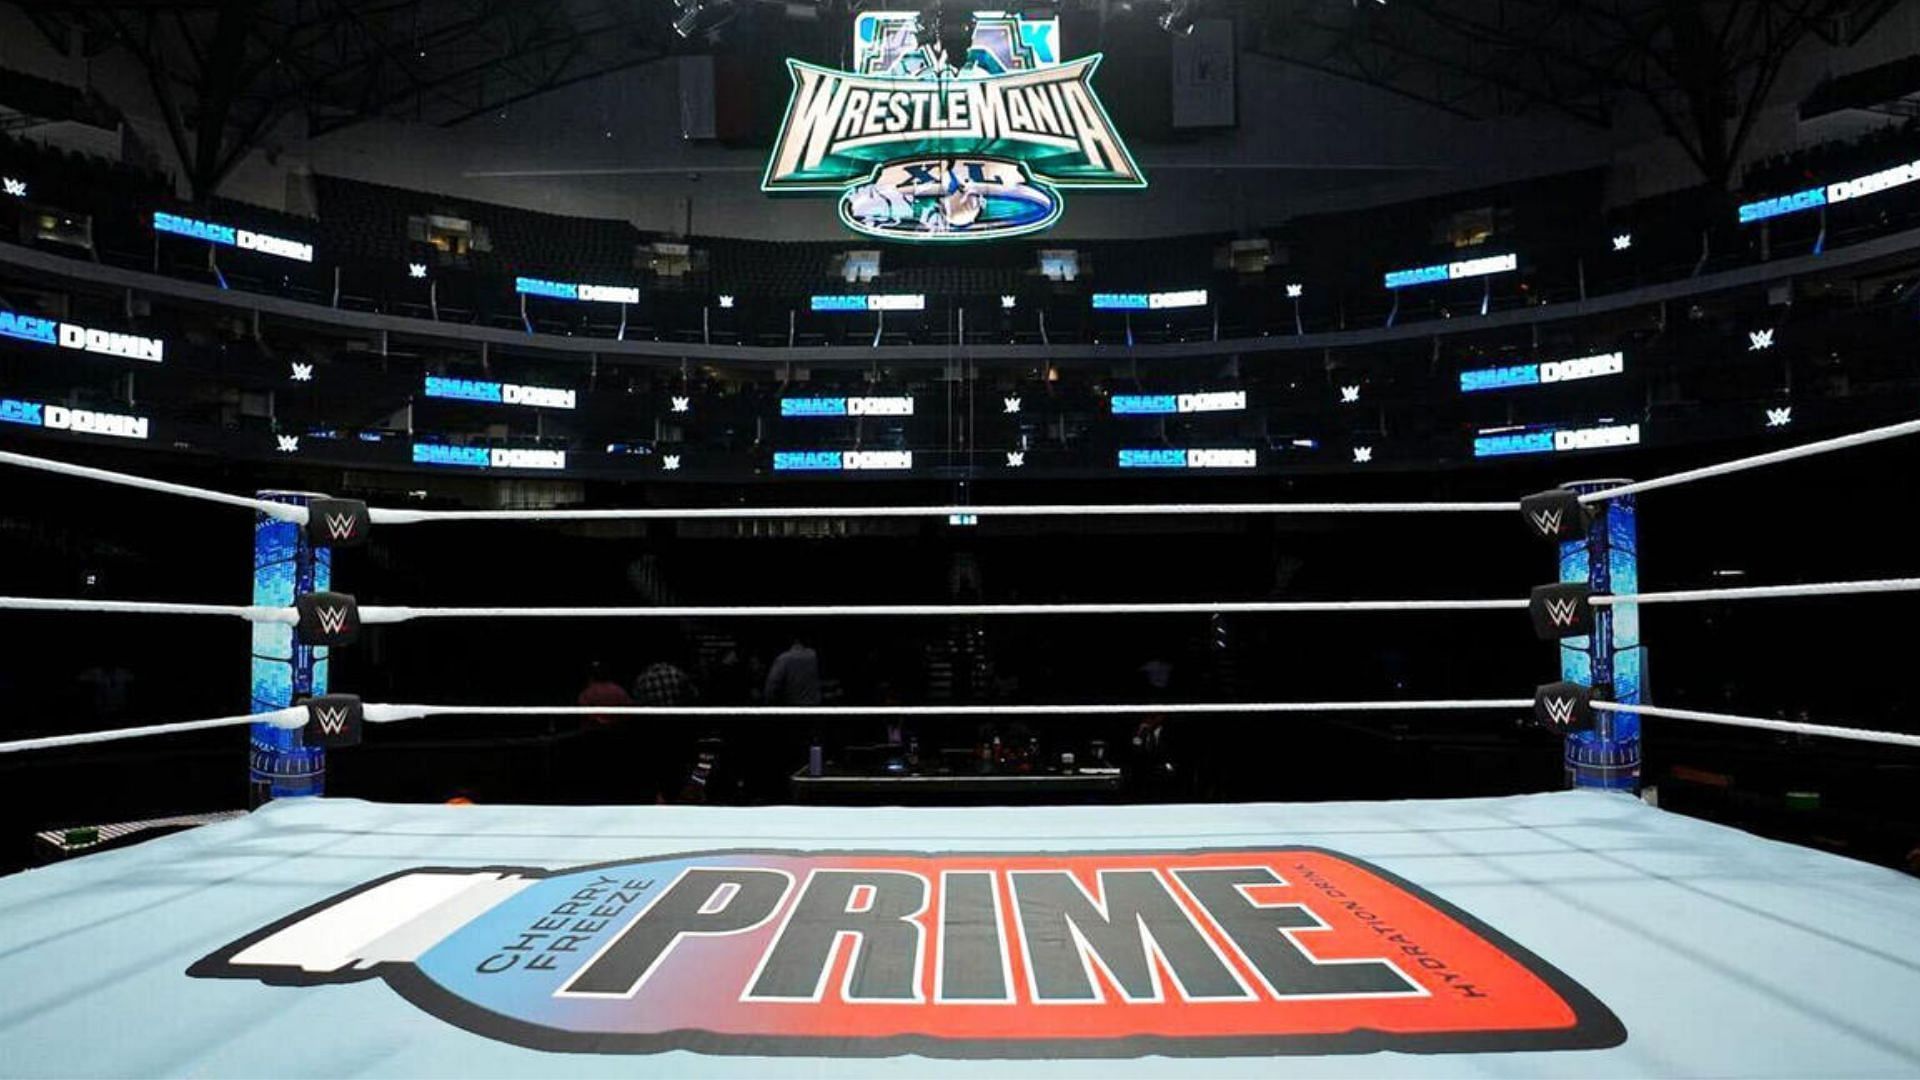 There will be an advertisement in the center of the ring this weekend.